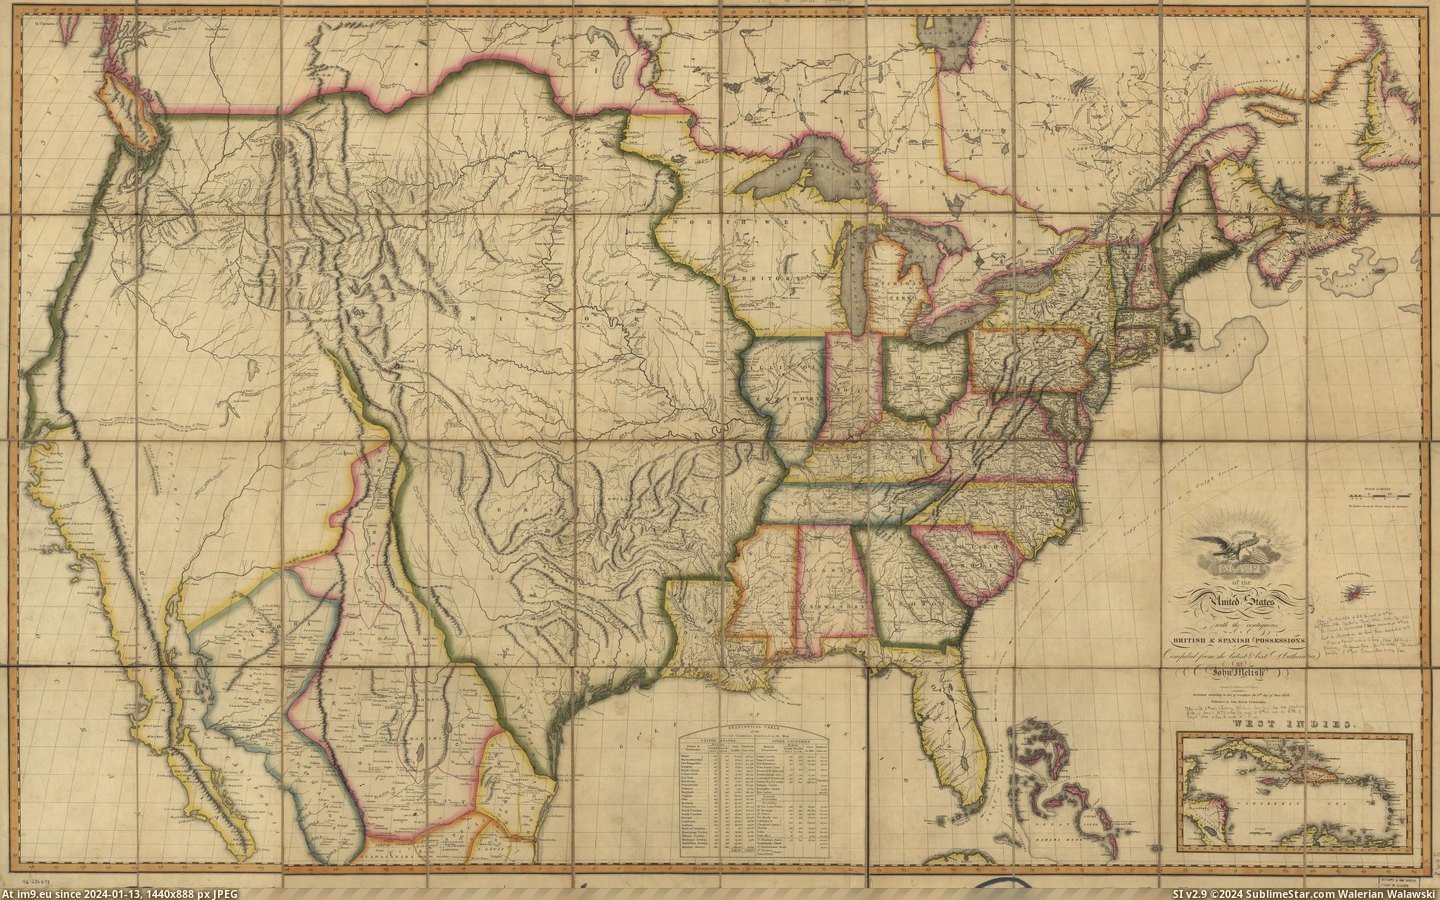 #Map #States #United #Contiguous #Possessions #British #America #Spanish [Mapporn] 1816 Map of the United States of America with the contiguous British and Spanish possessions [2,165 x 1,347] Pic. (Image of album My r/MAPS favs))